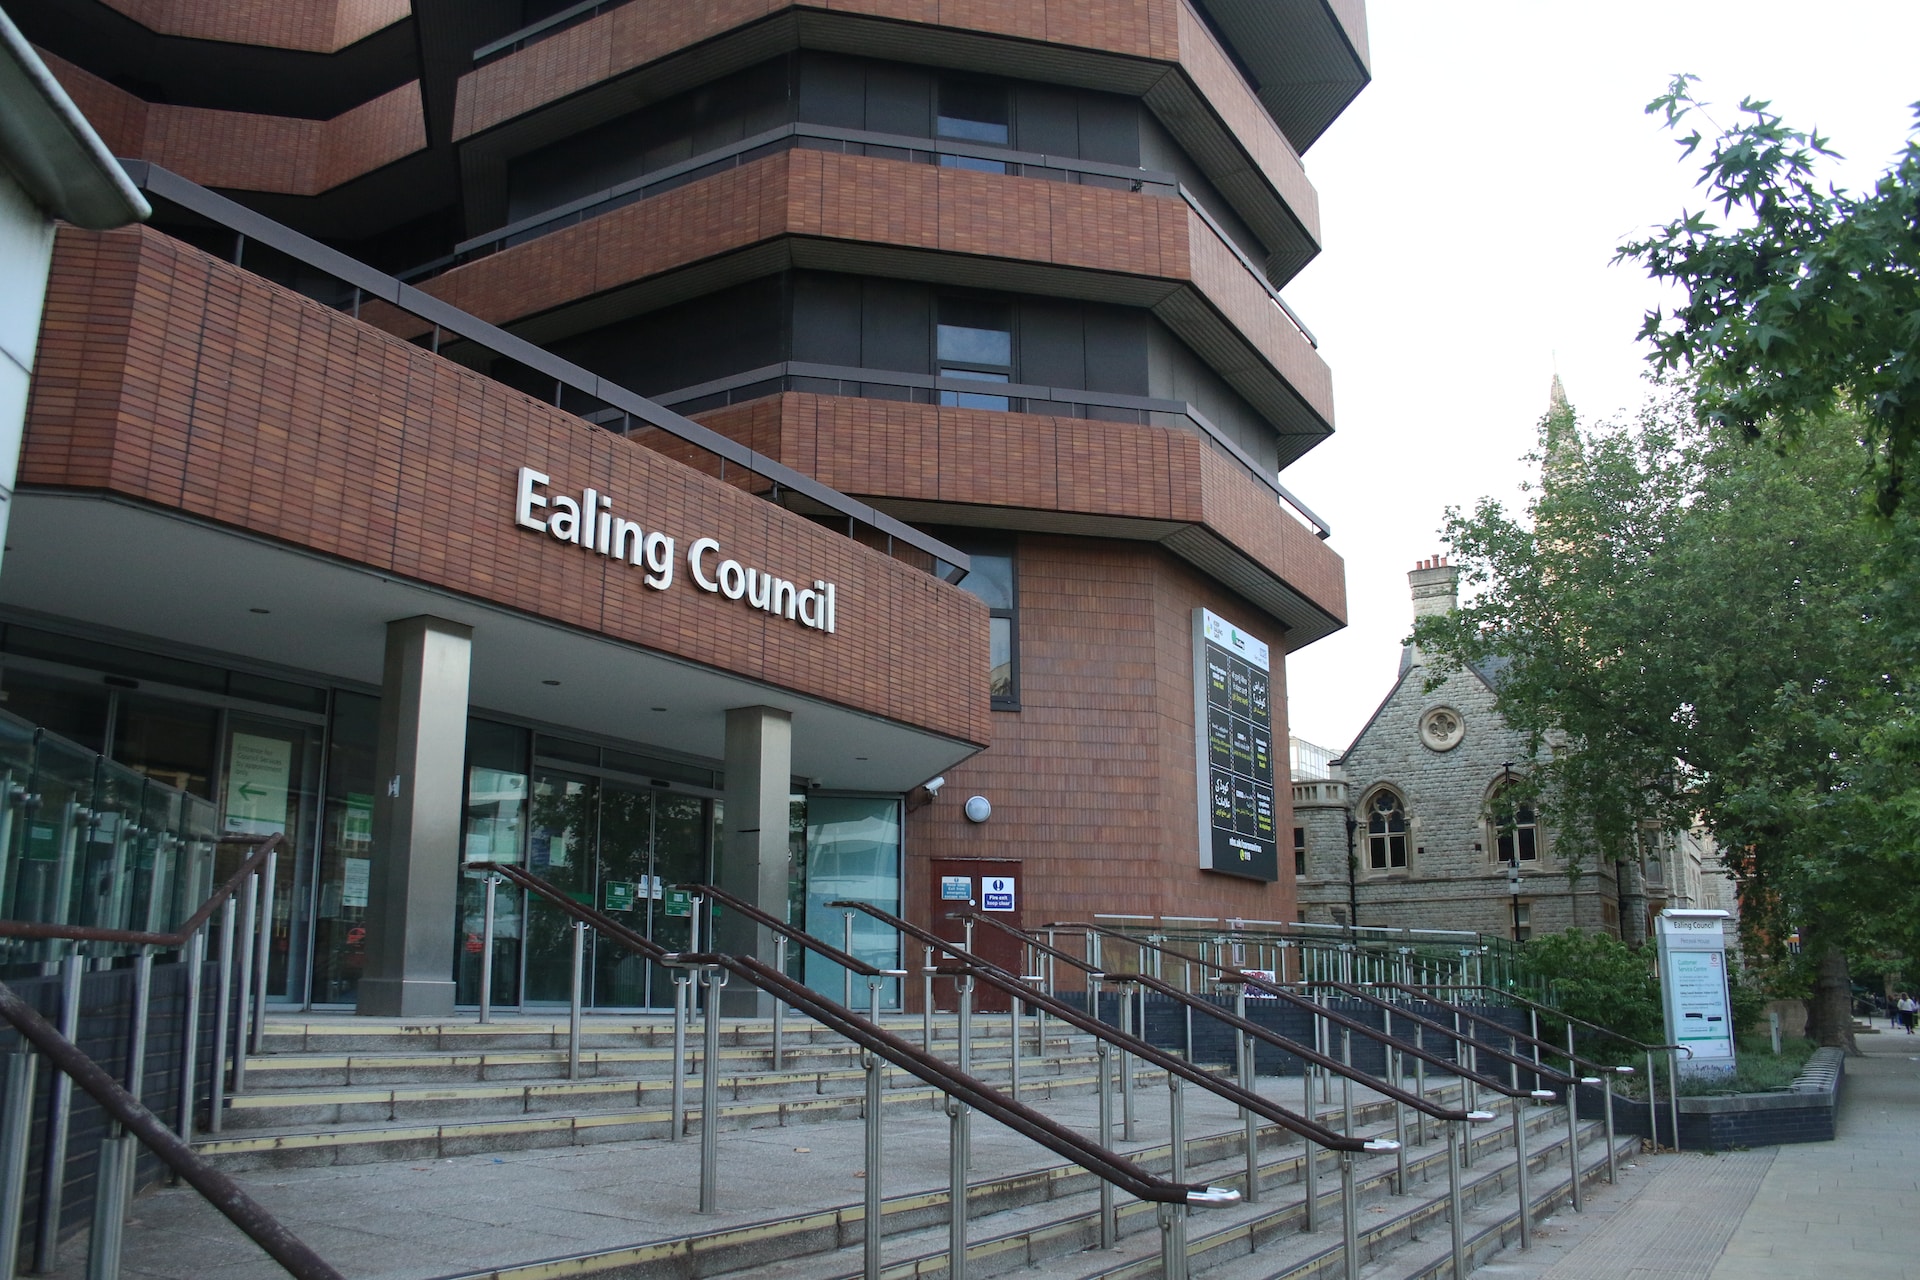 Ealing council offices